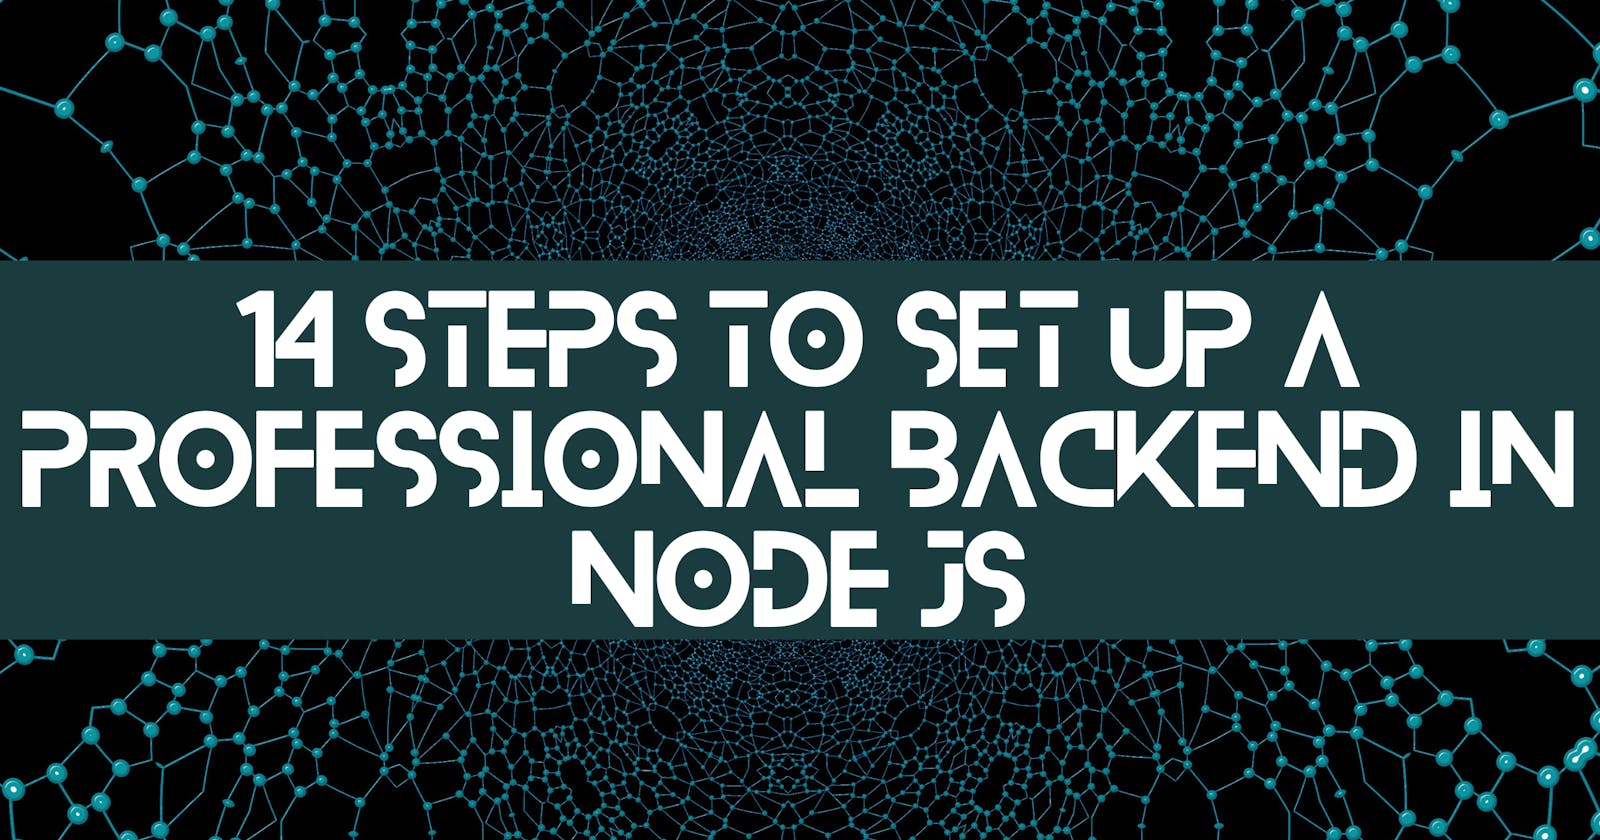 14 Steps to Set up a Professional Backend in Node JS